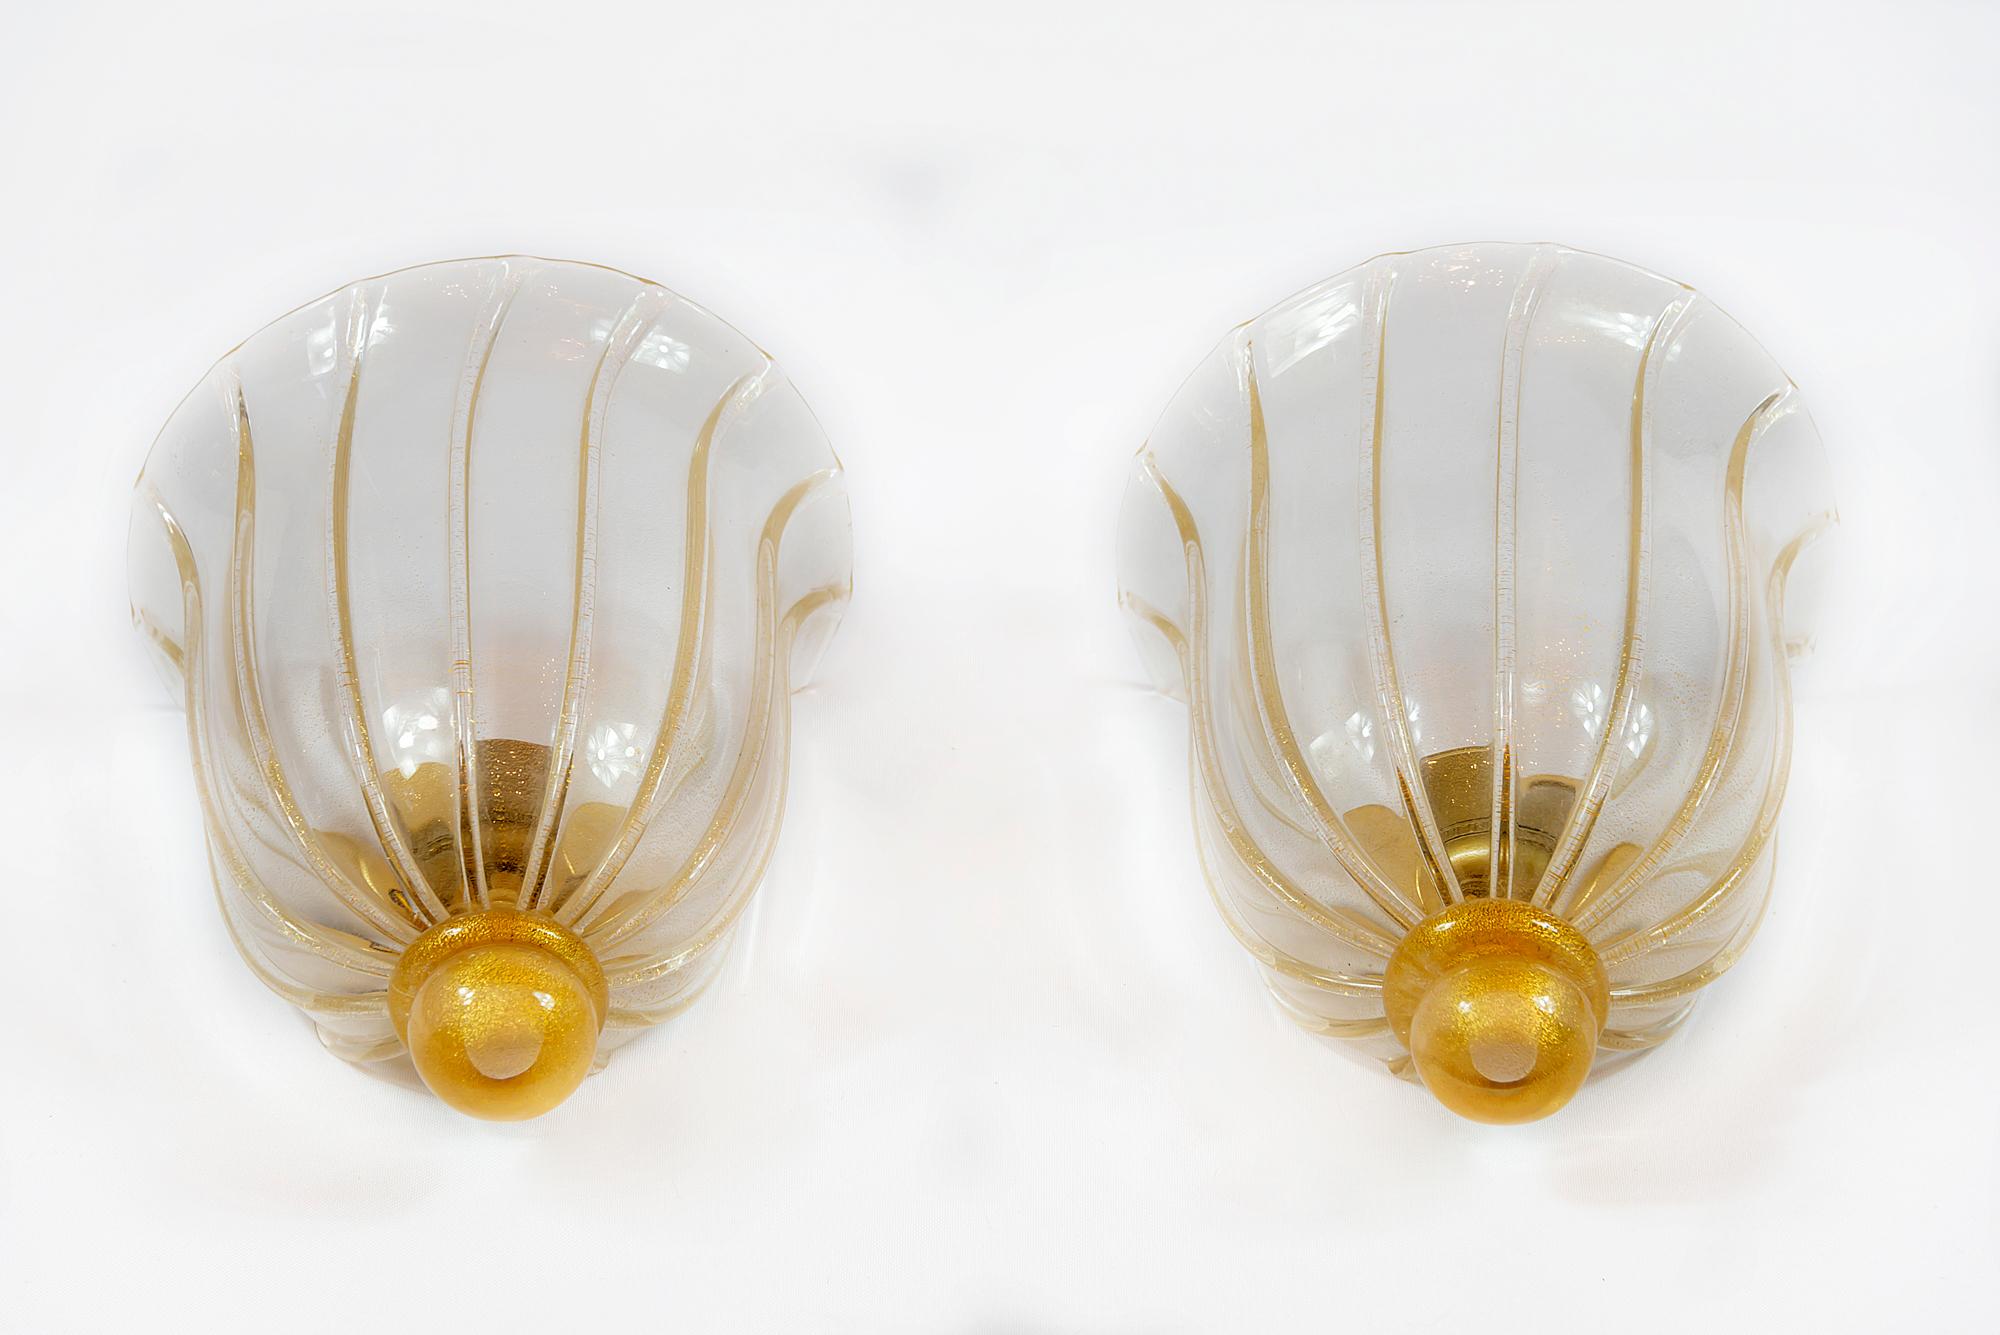 Pair of midcentury Italian wall light sconces handmade of Murano glass with inlaid gold dust and brass base by Seguso, circa 1970. Bulb is E27.